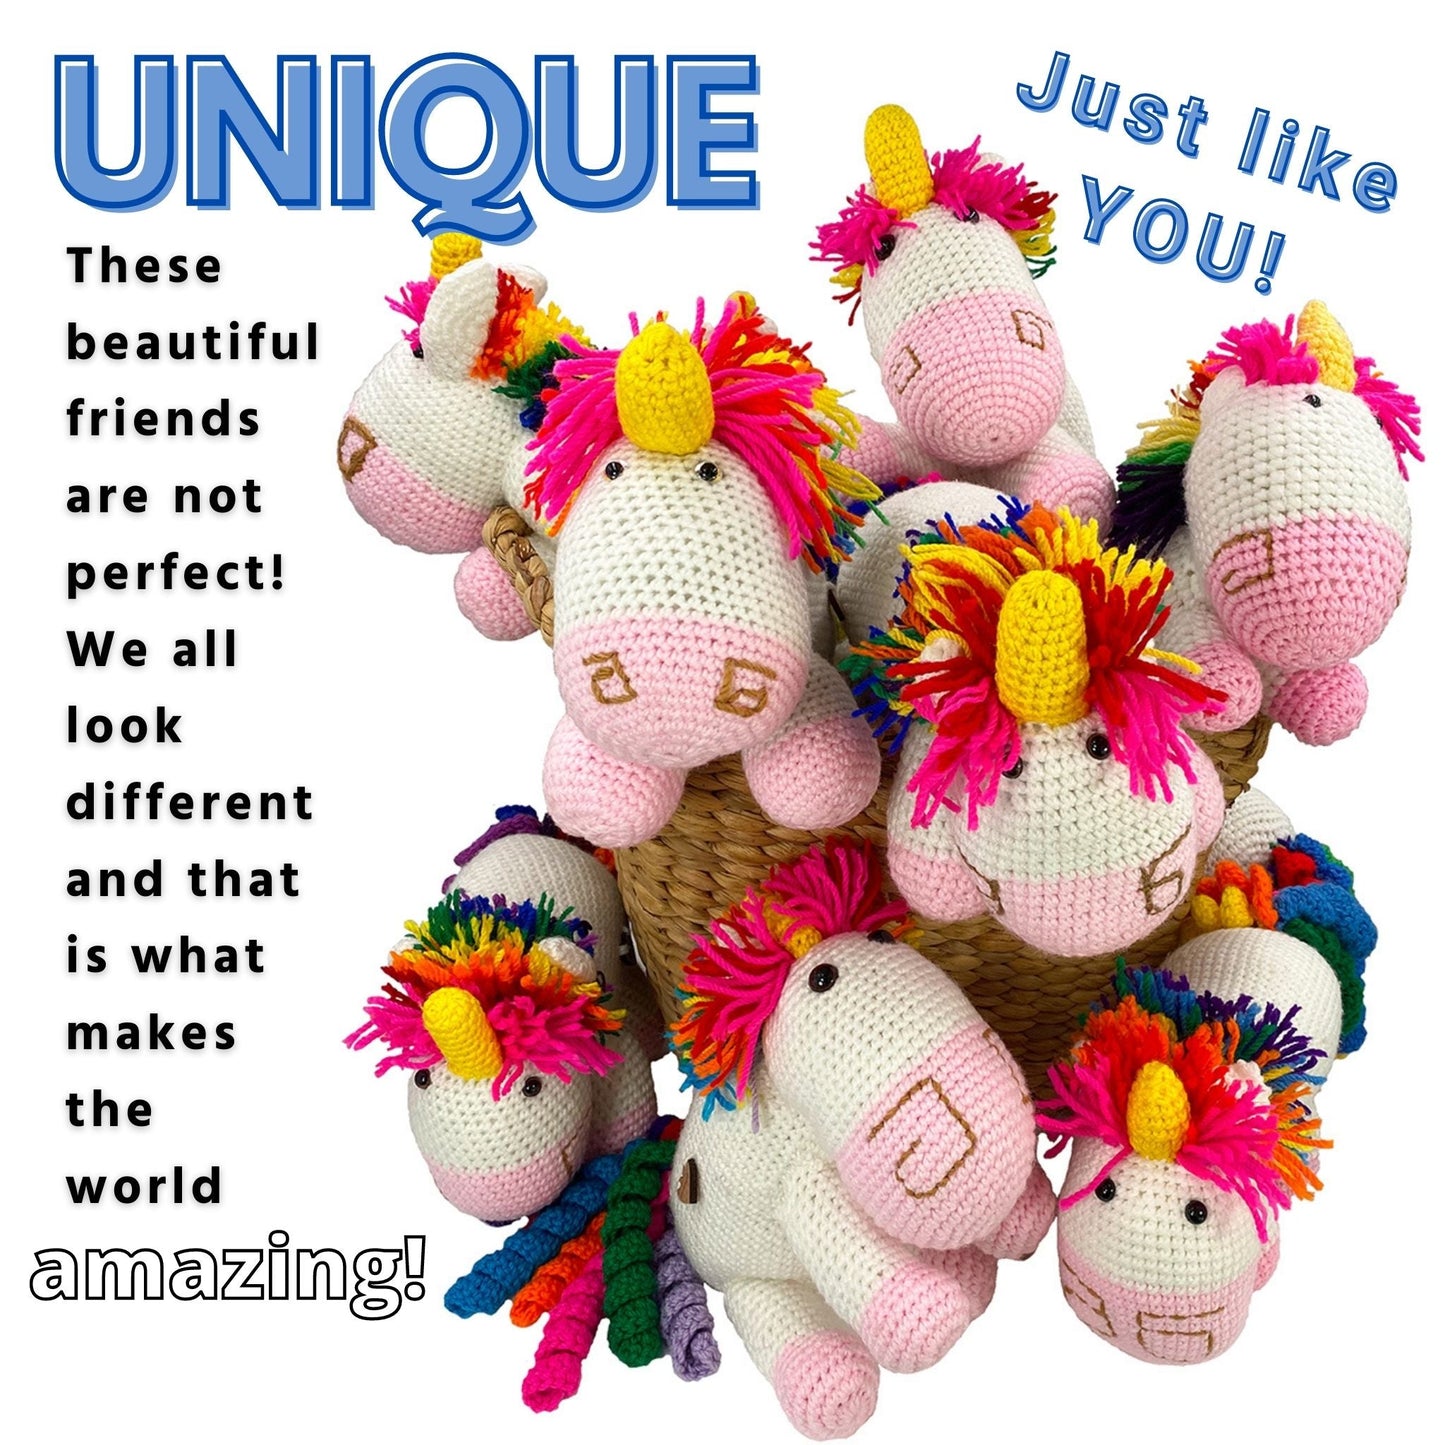 Unicorn - Handmade in South Africa by the ladies from Rare Bears Charity